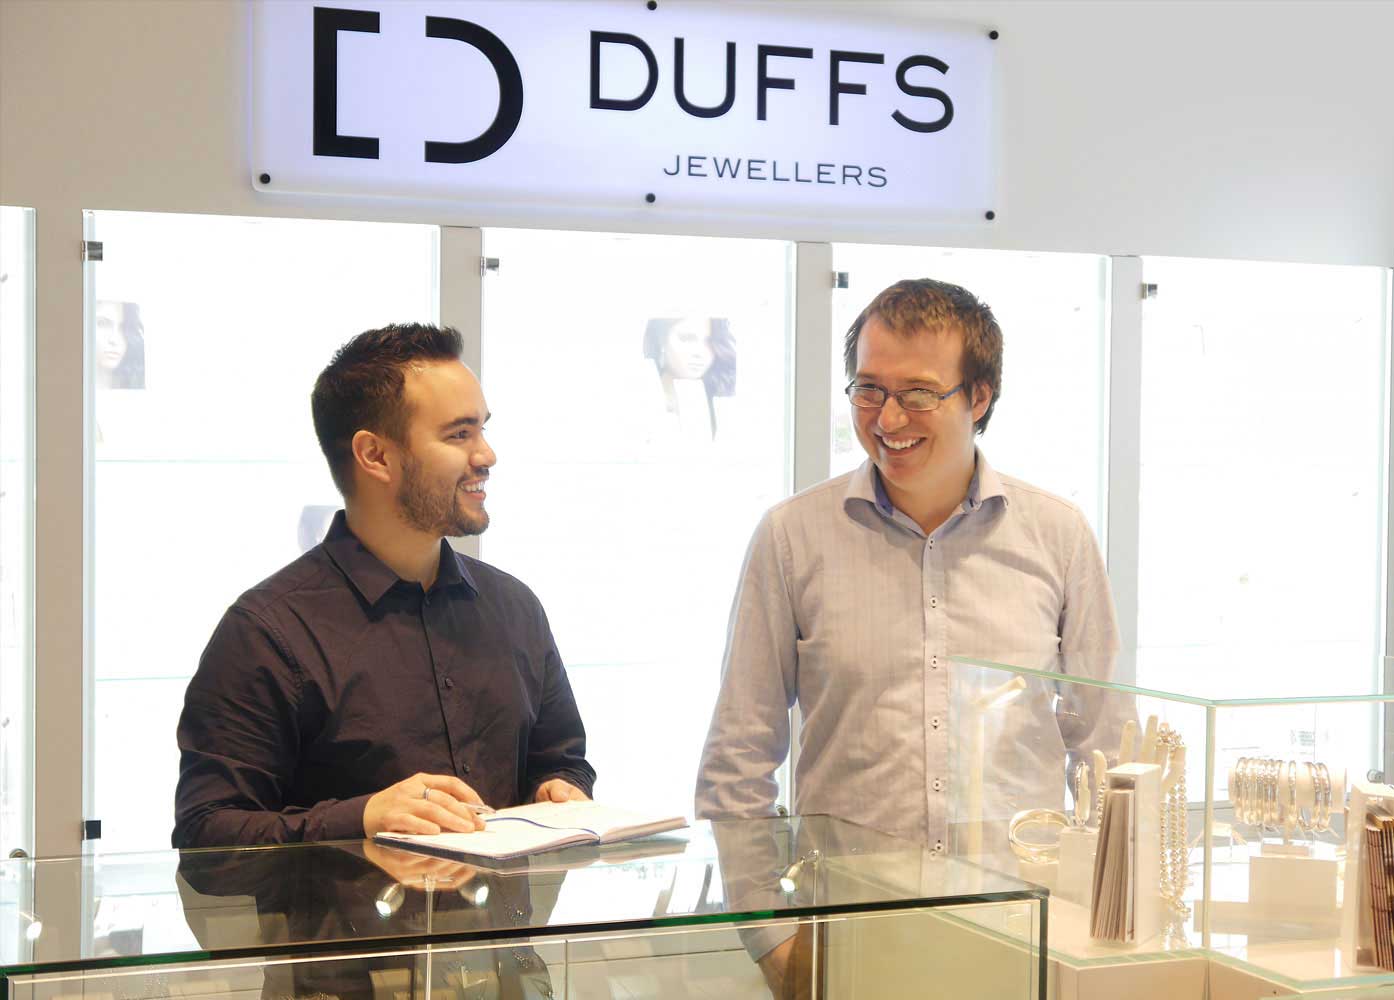 Duffs Jewellers shining bright with Microkeeper